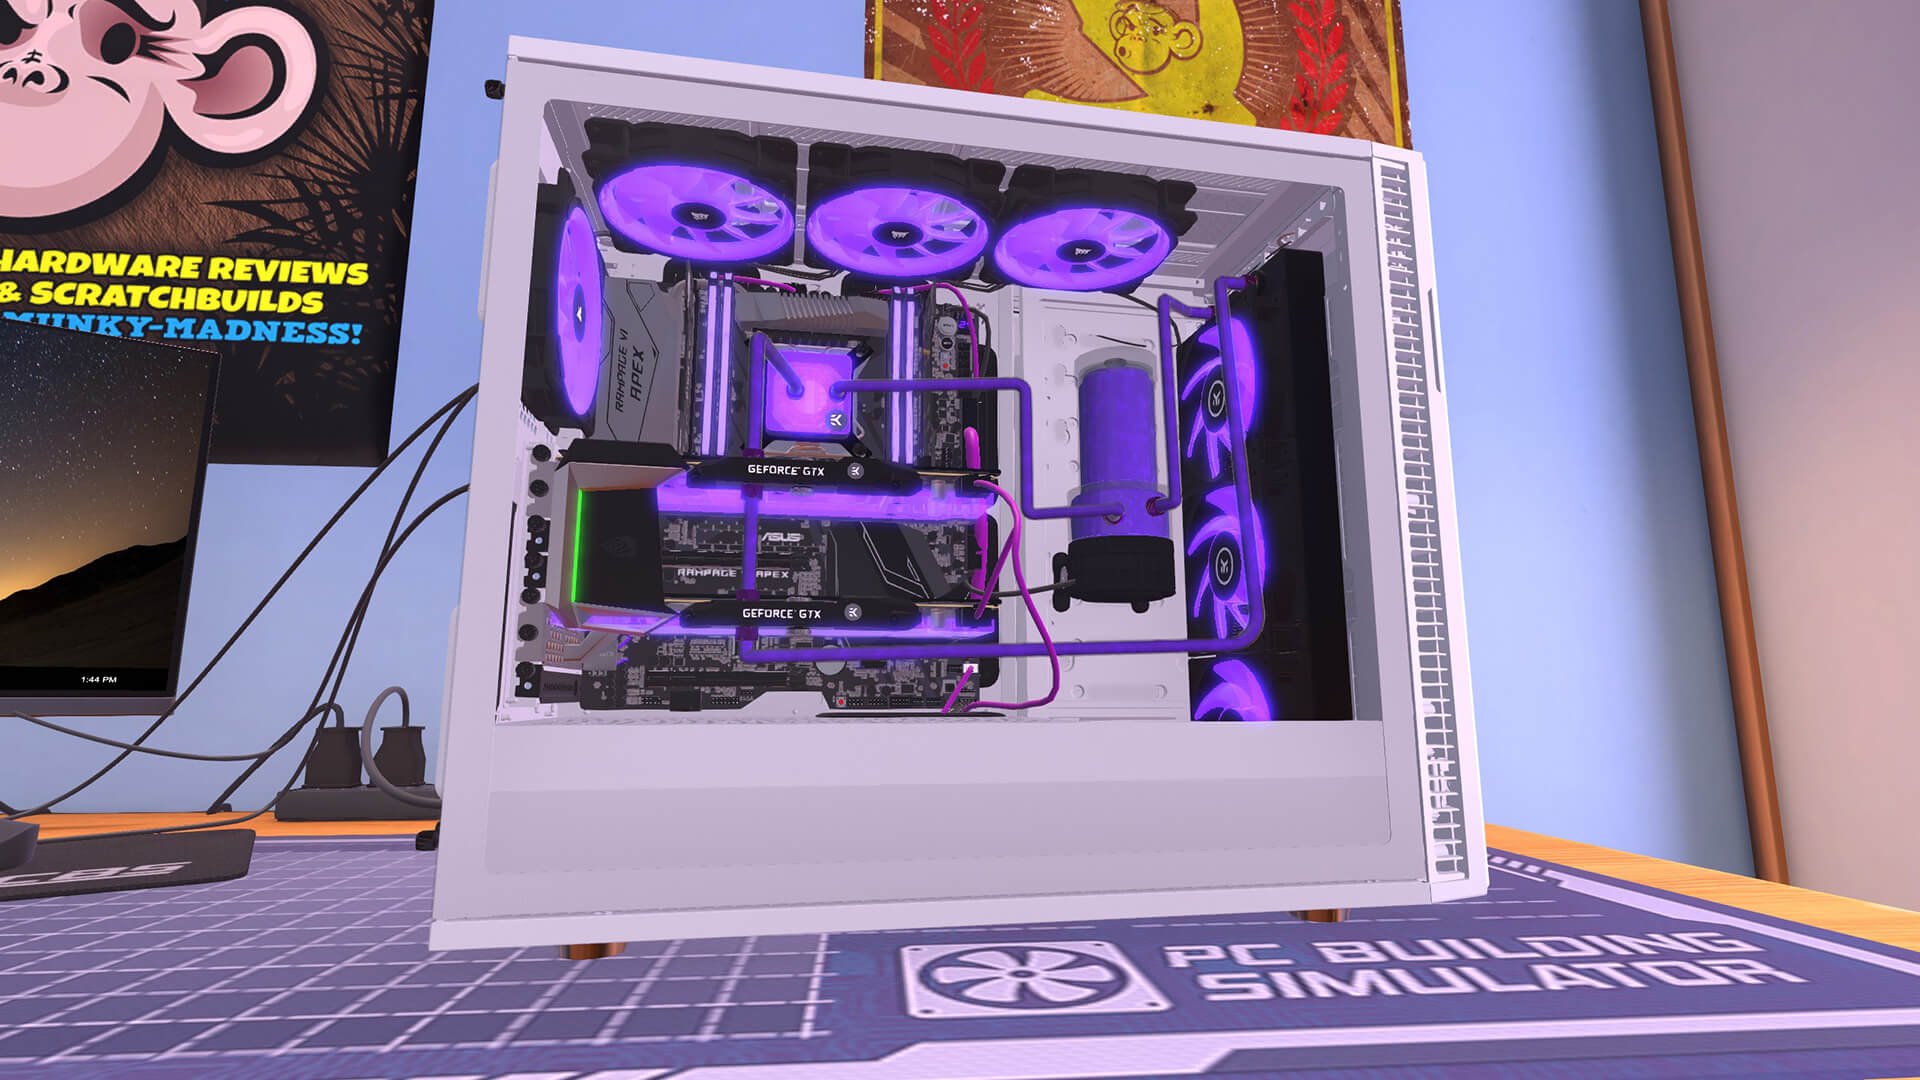 PC Building Simulator - A white PC case is open on the side with a GTX GeForce GPU inside and lots of purple lighting.